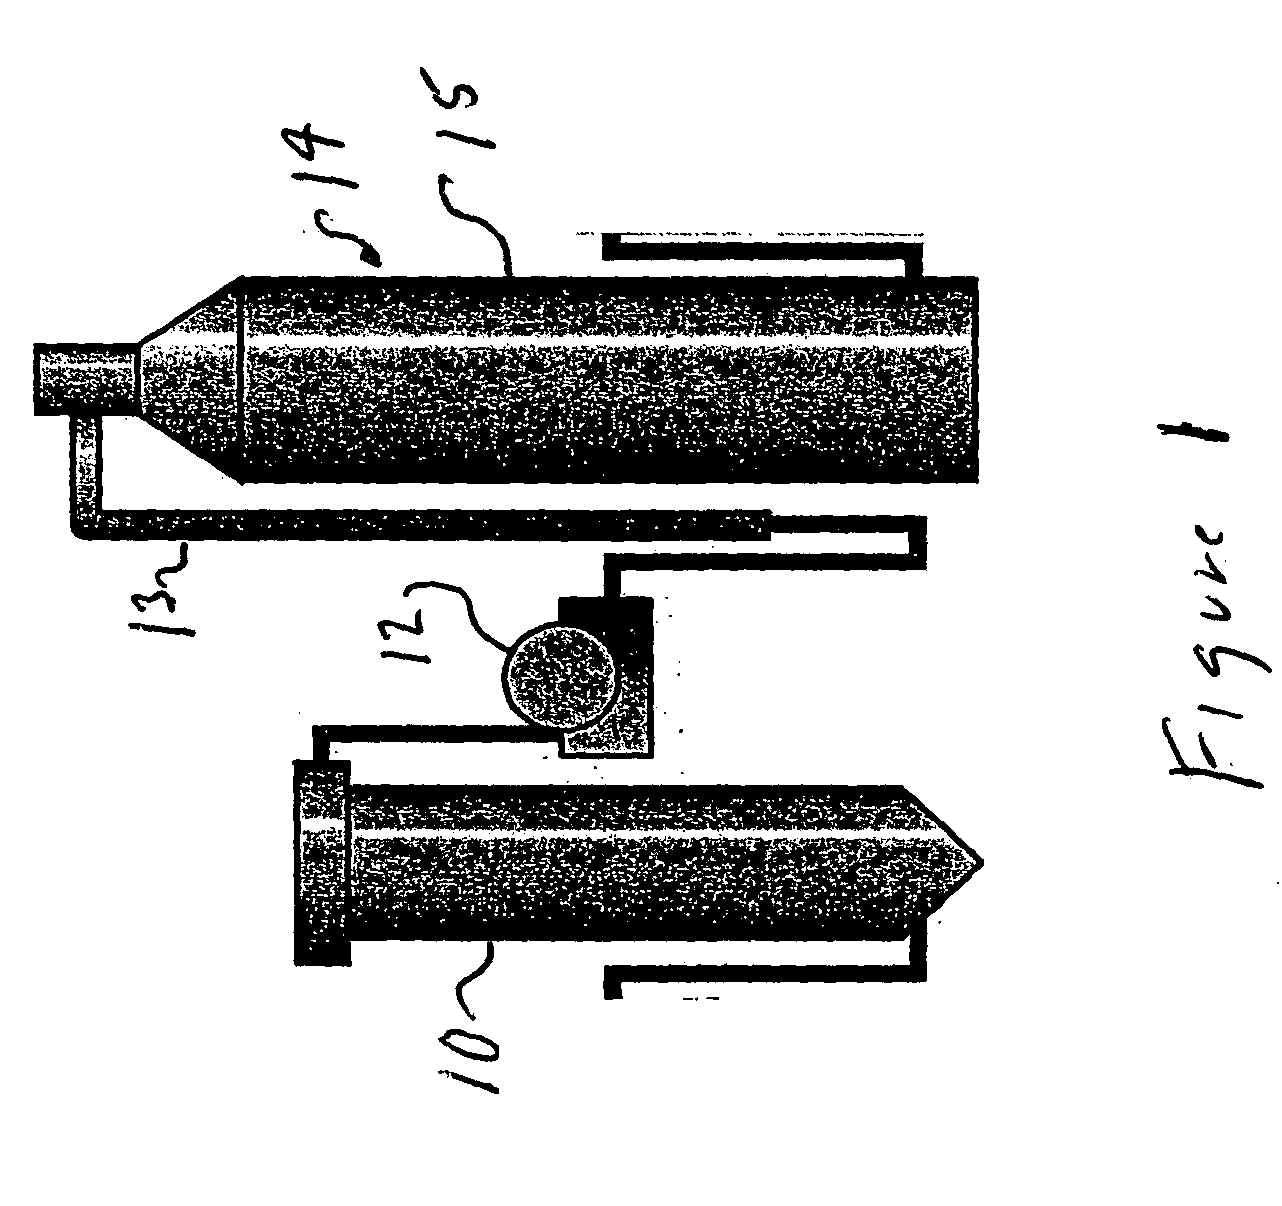 Methods for making carboxylated pulp fibers